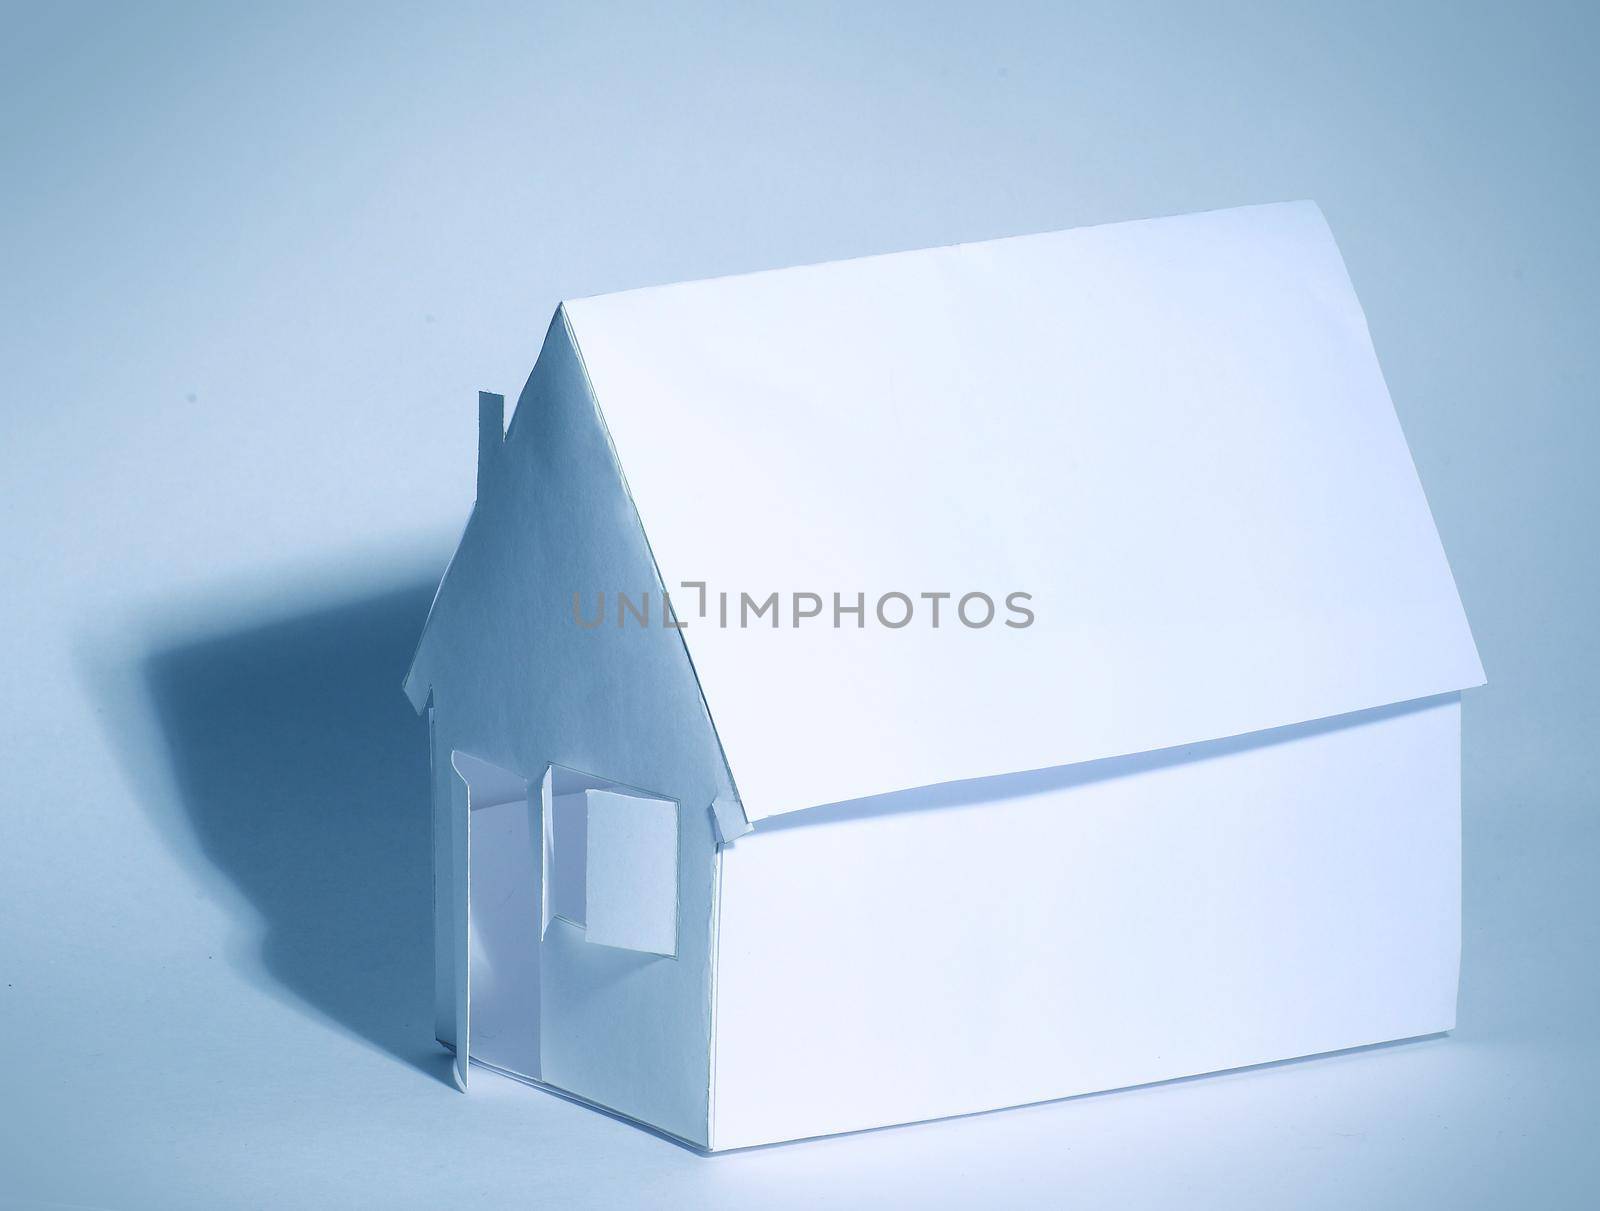 Paper house on a white background in cool colors by SmartPhotoLab